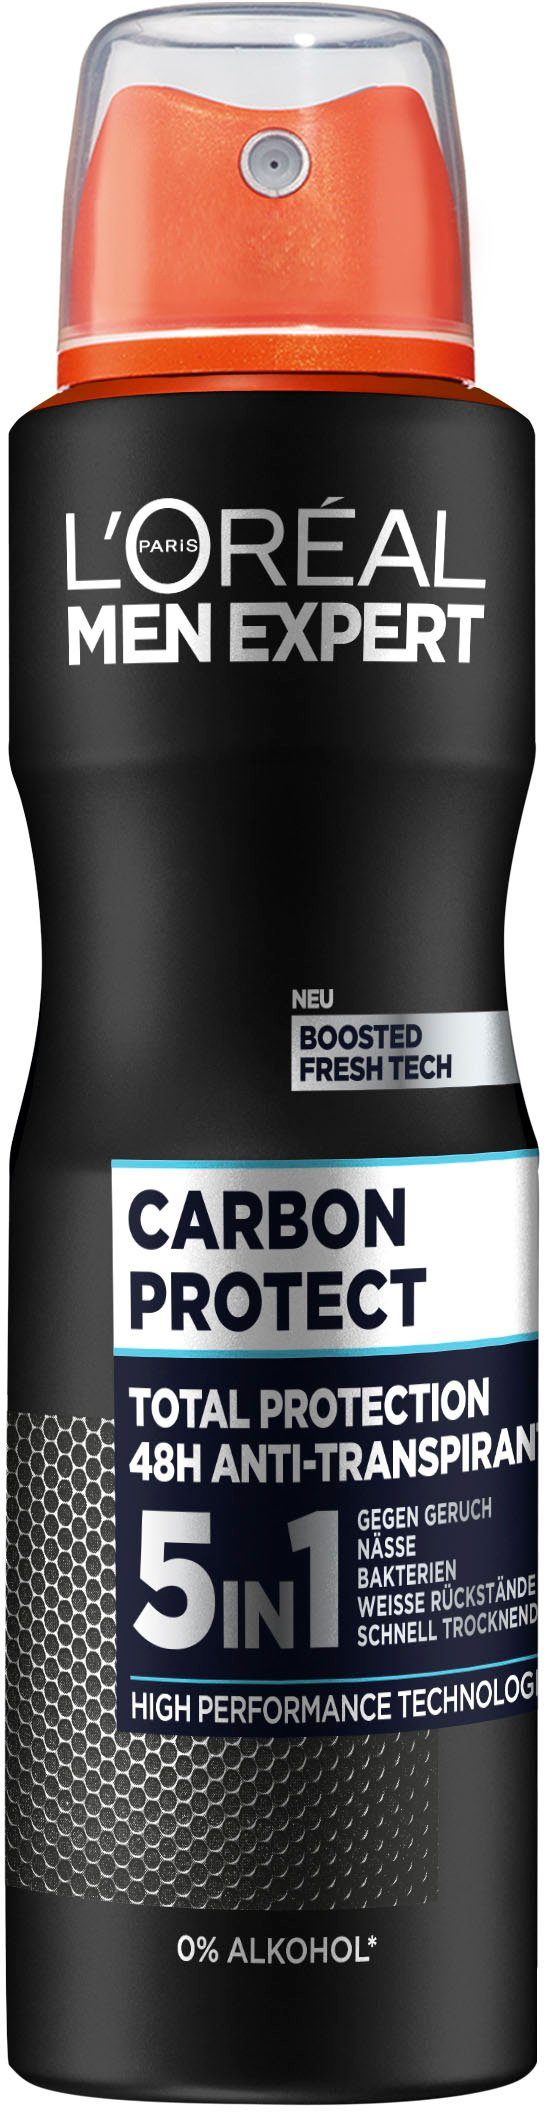 6-tlg. Deo-Spray Protect Carbon PARIS EXPERT L'ORÉAL MEN Spray Packung, Deo 5-in-1,